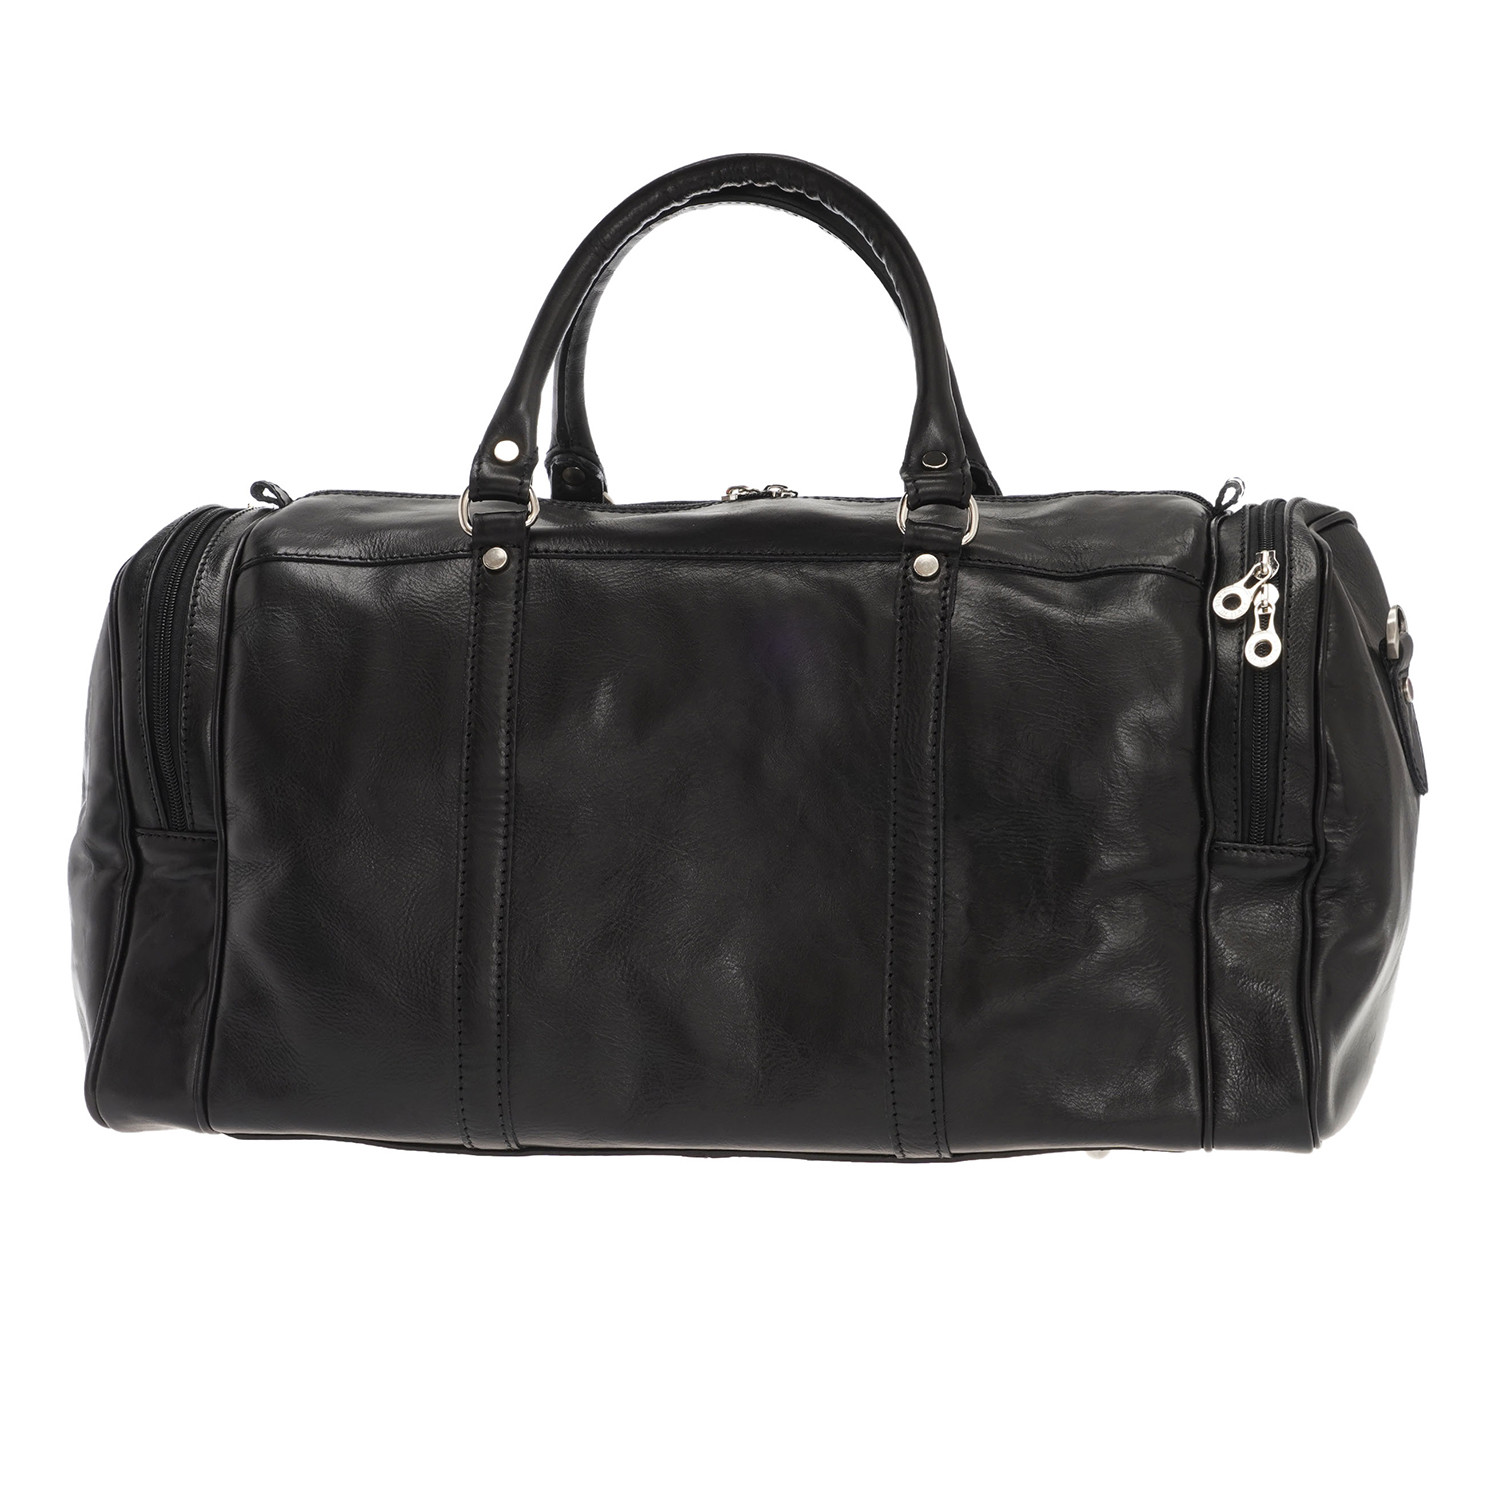 Colombo Leather Duffle Bag (Black) - Accessories Clearance - Touch of Modern